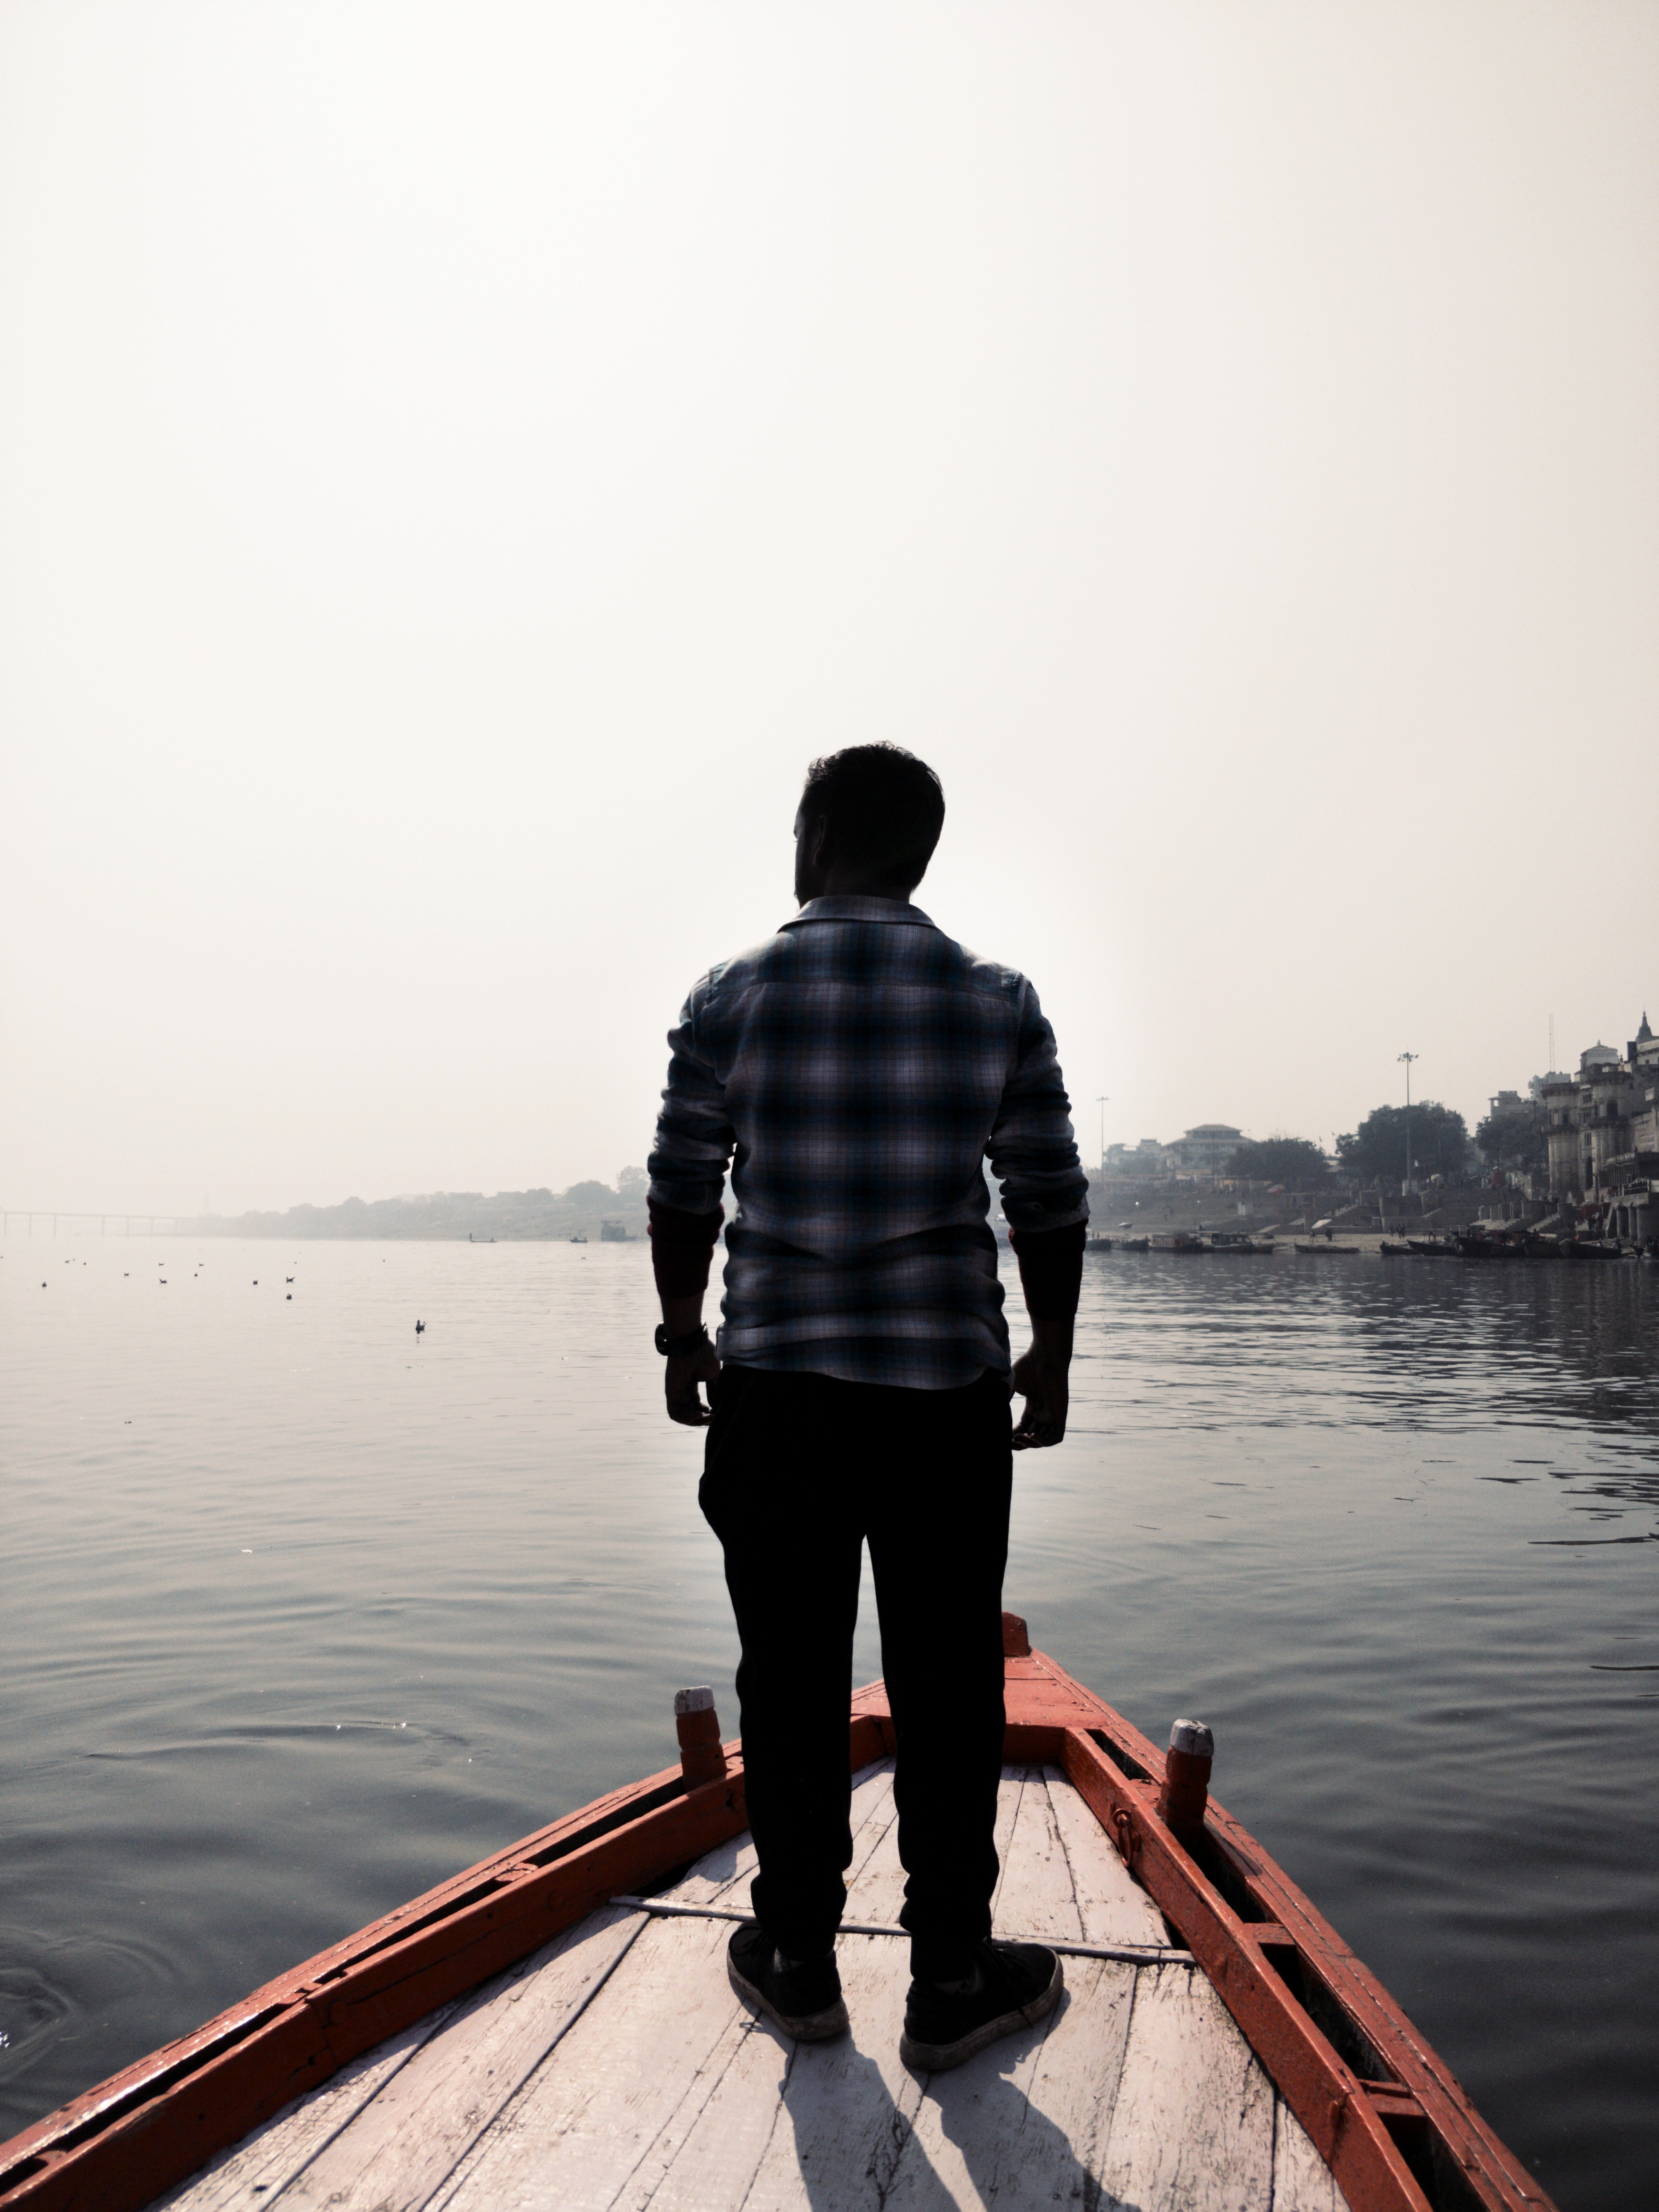 Man standing on wooden boat photo